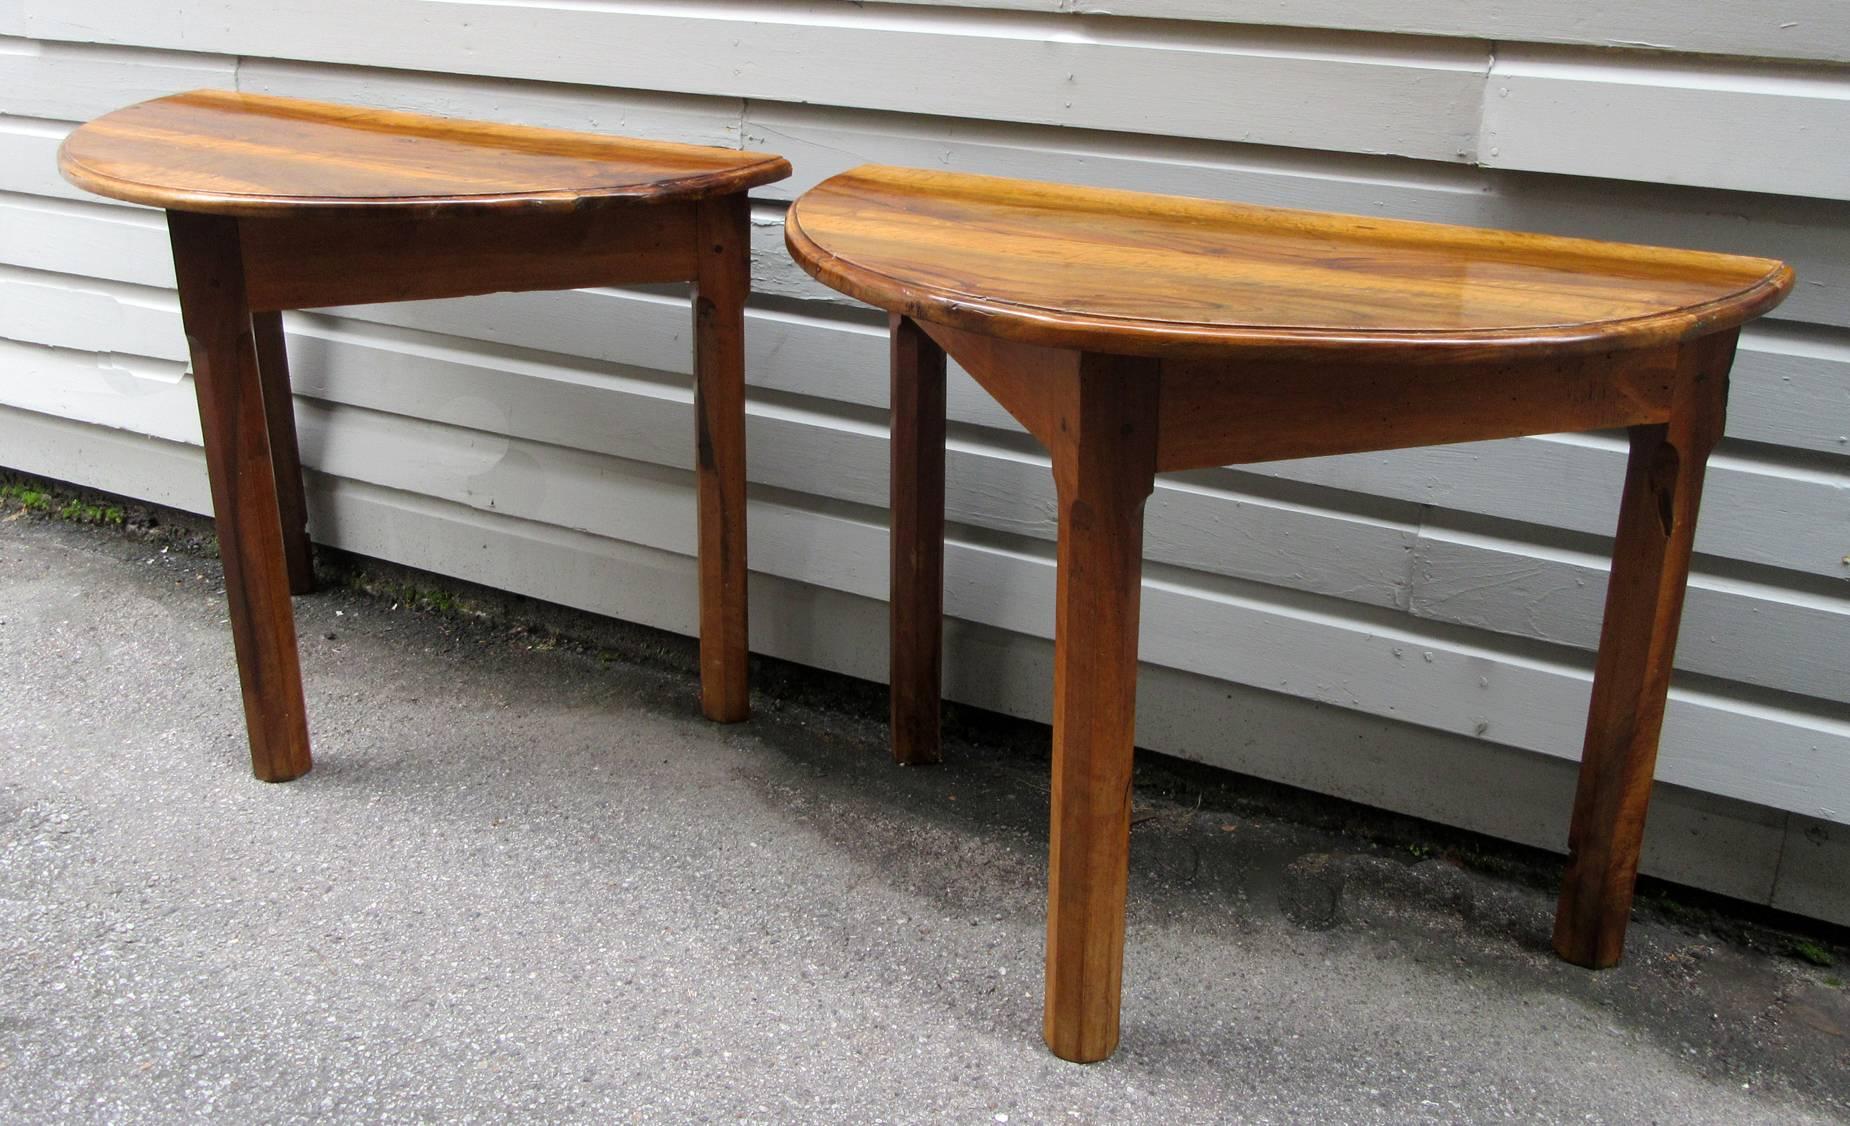 A pair of French provincial fruitwood demilune tables most likely made of olivewood, circa 1790. With excellent cognac color and a French polish finish.